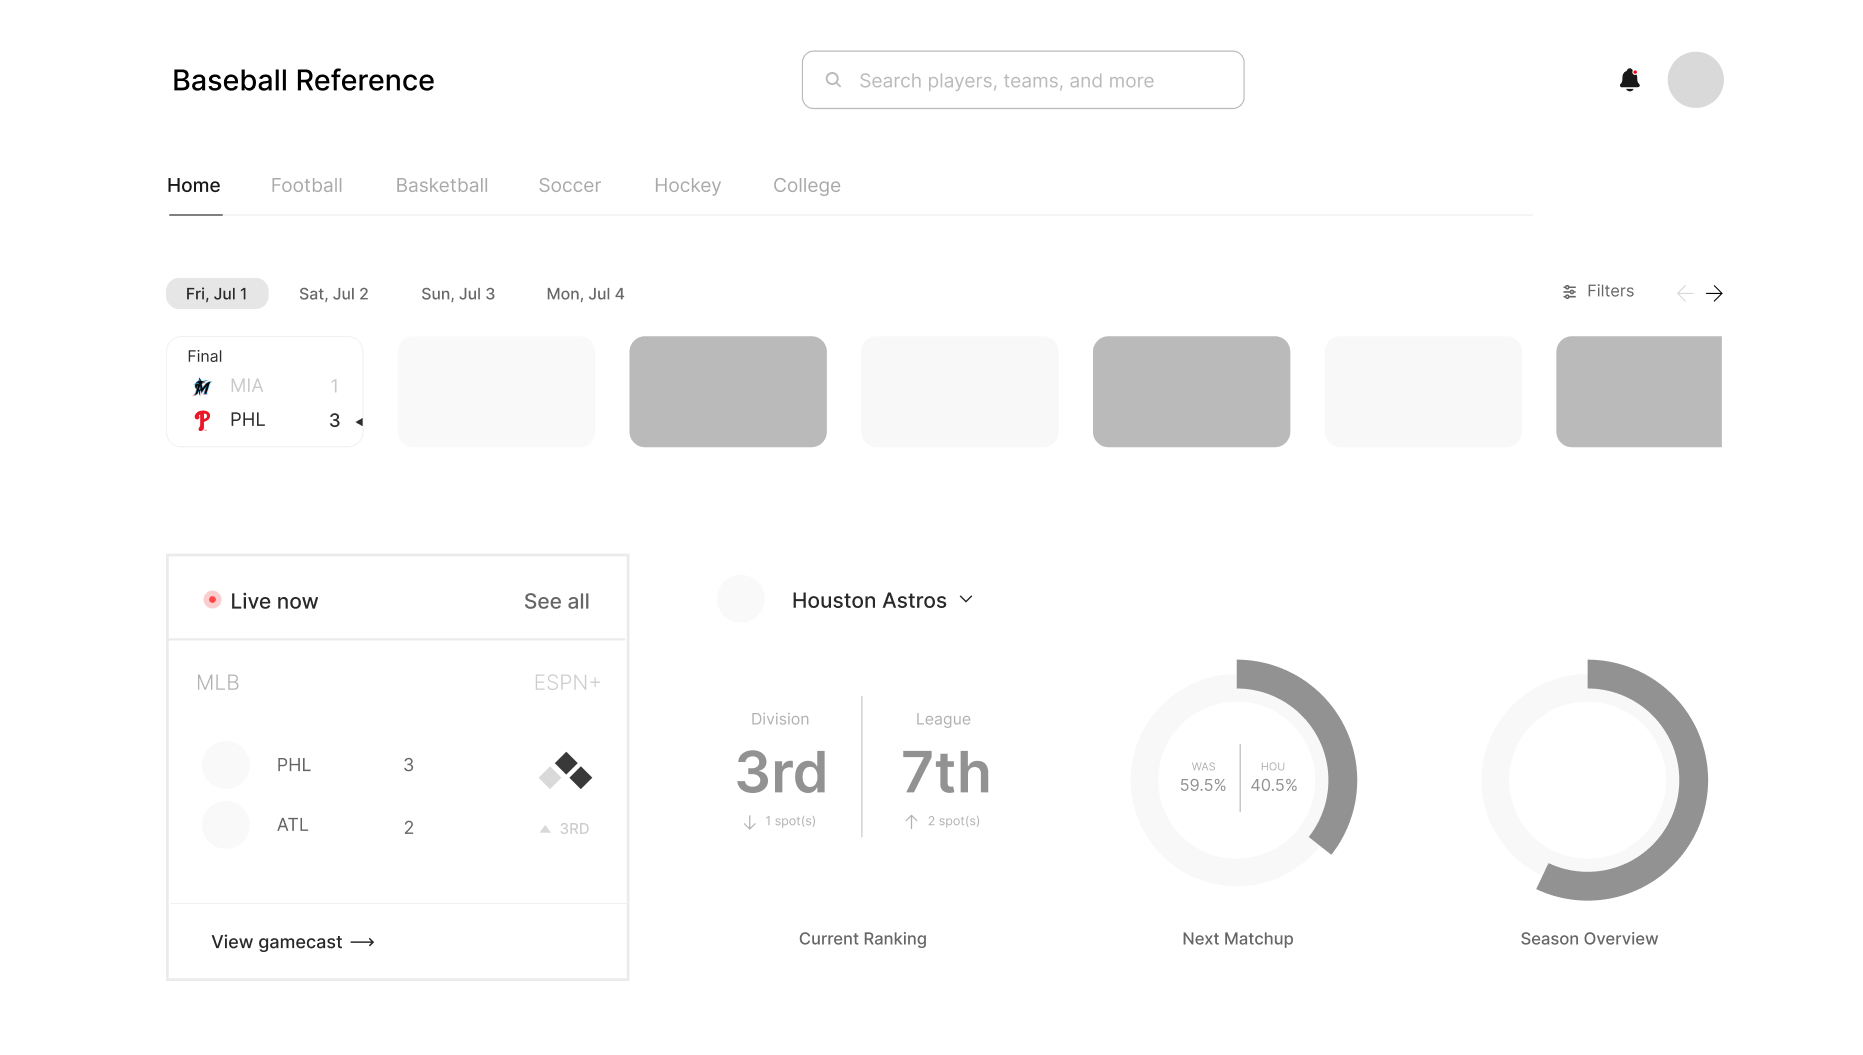 Low-fidelity dashboard concept with customized information and data visualization elements.